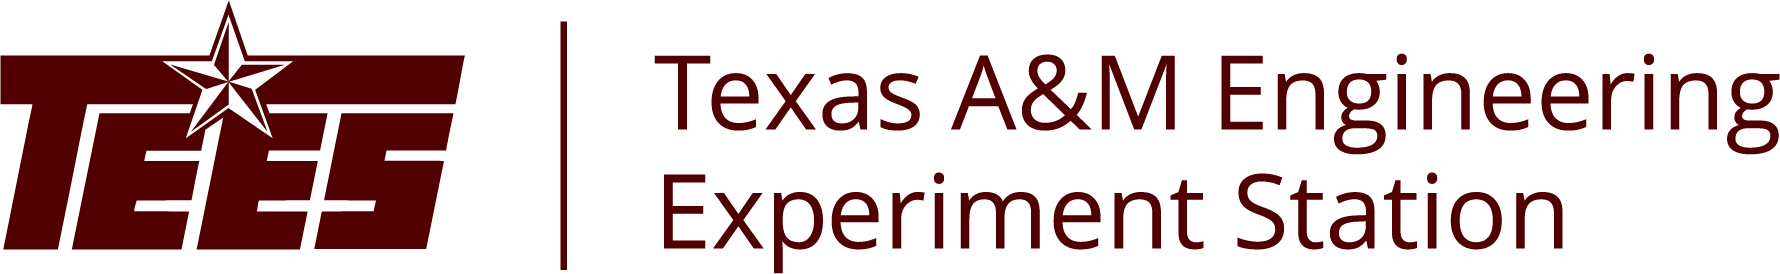 Texas A&M Engineering Experiment Station logo